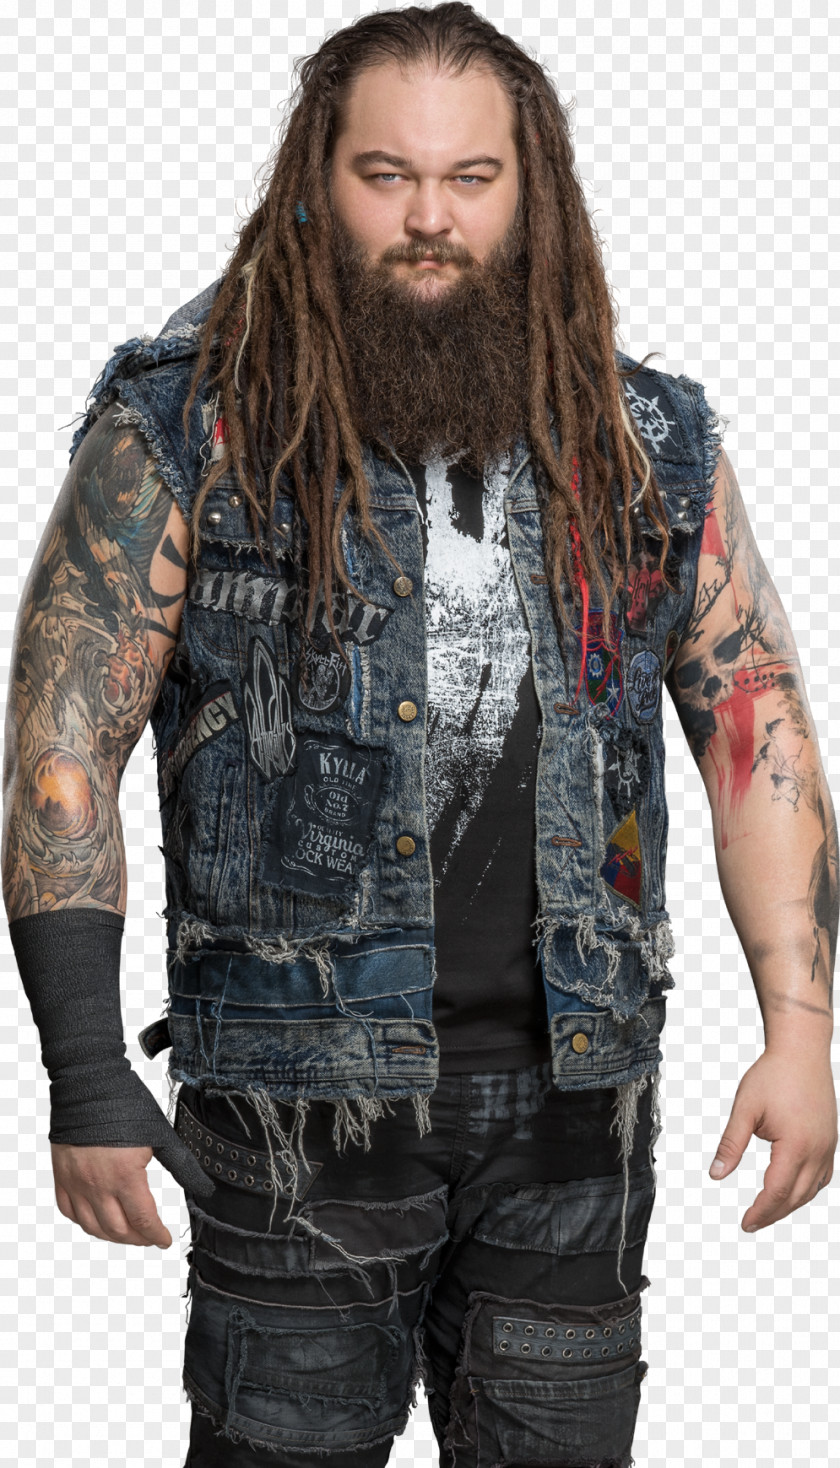 Bray Wyatt WWE Championship WrestleMania 33 SmackDown 34 PNG 34, dreads clipart PNG